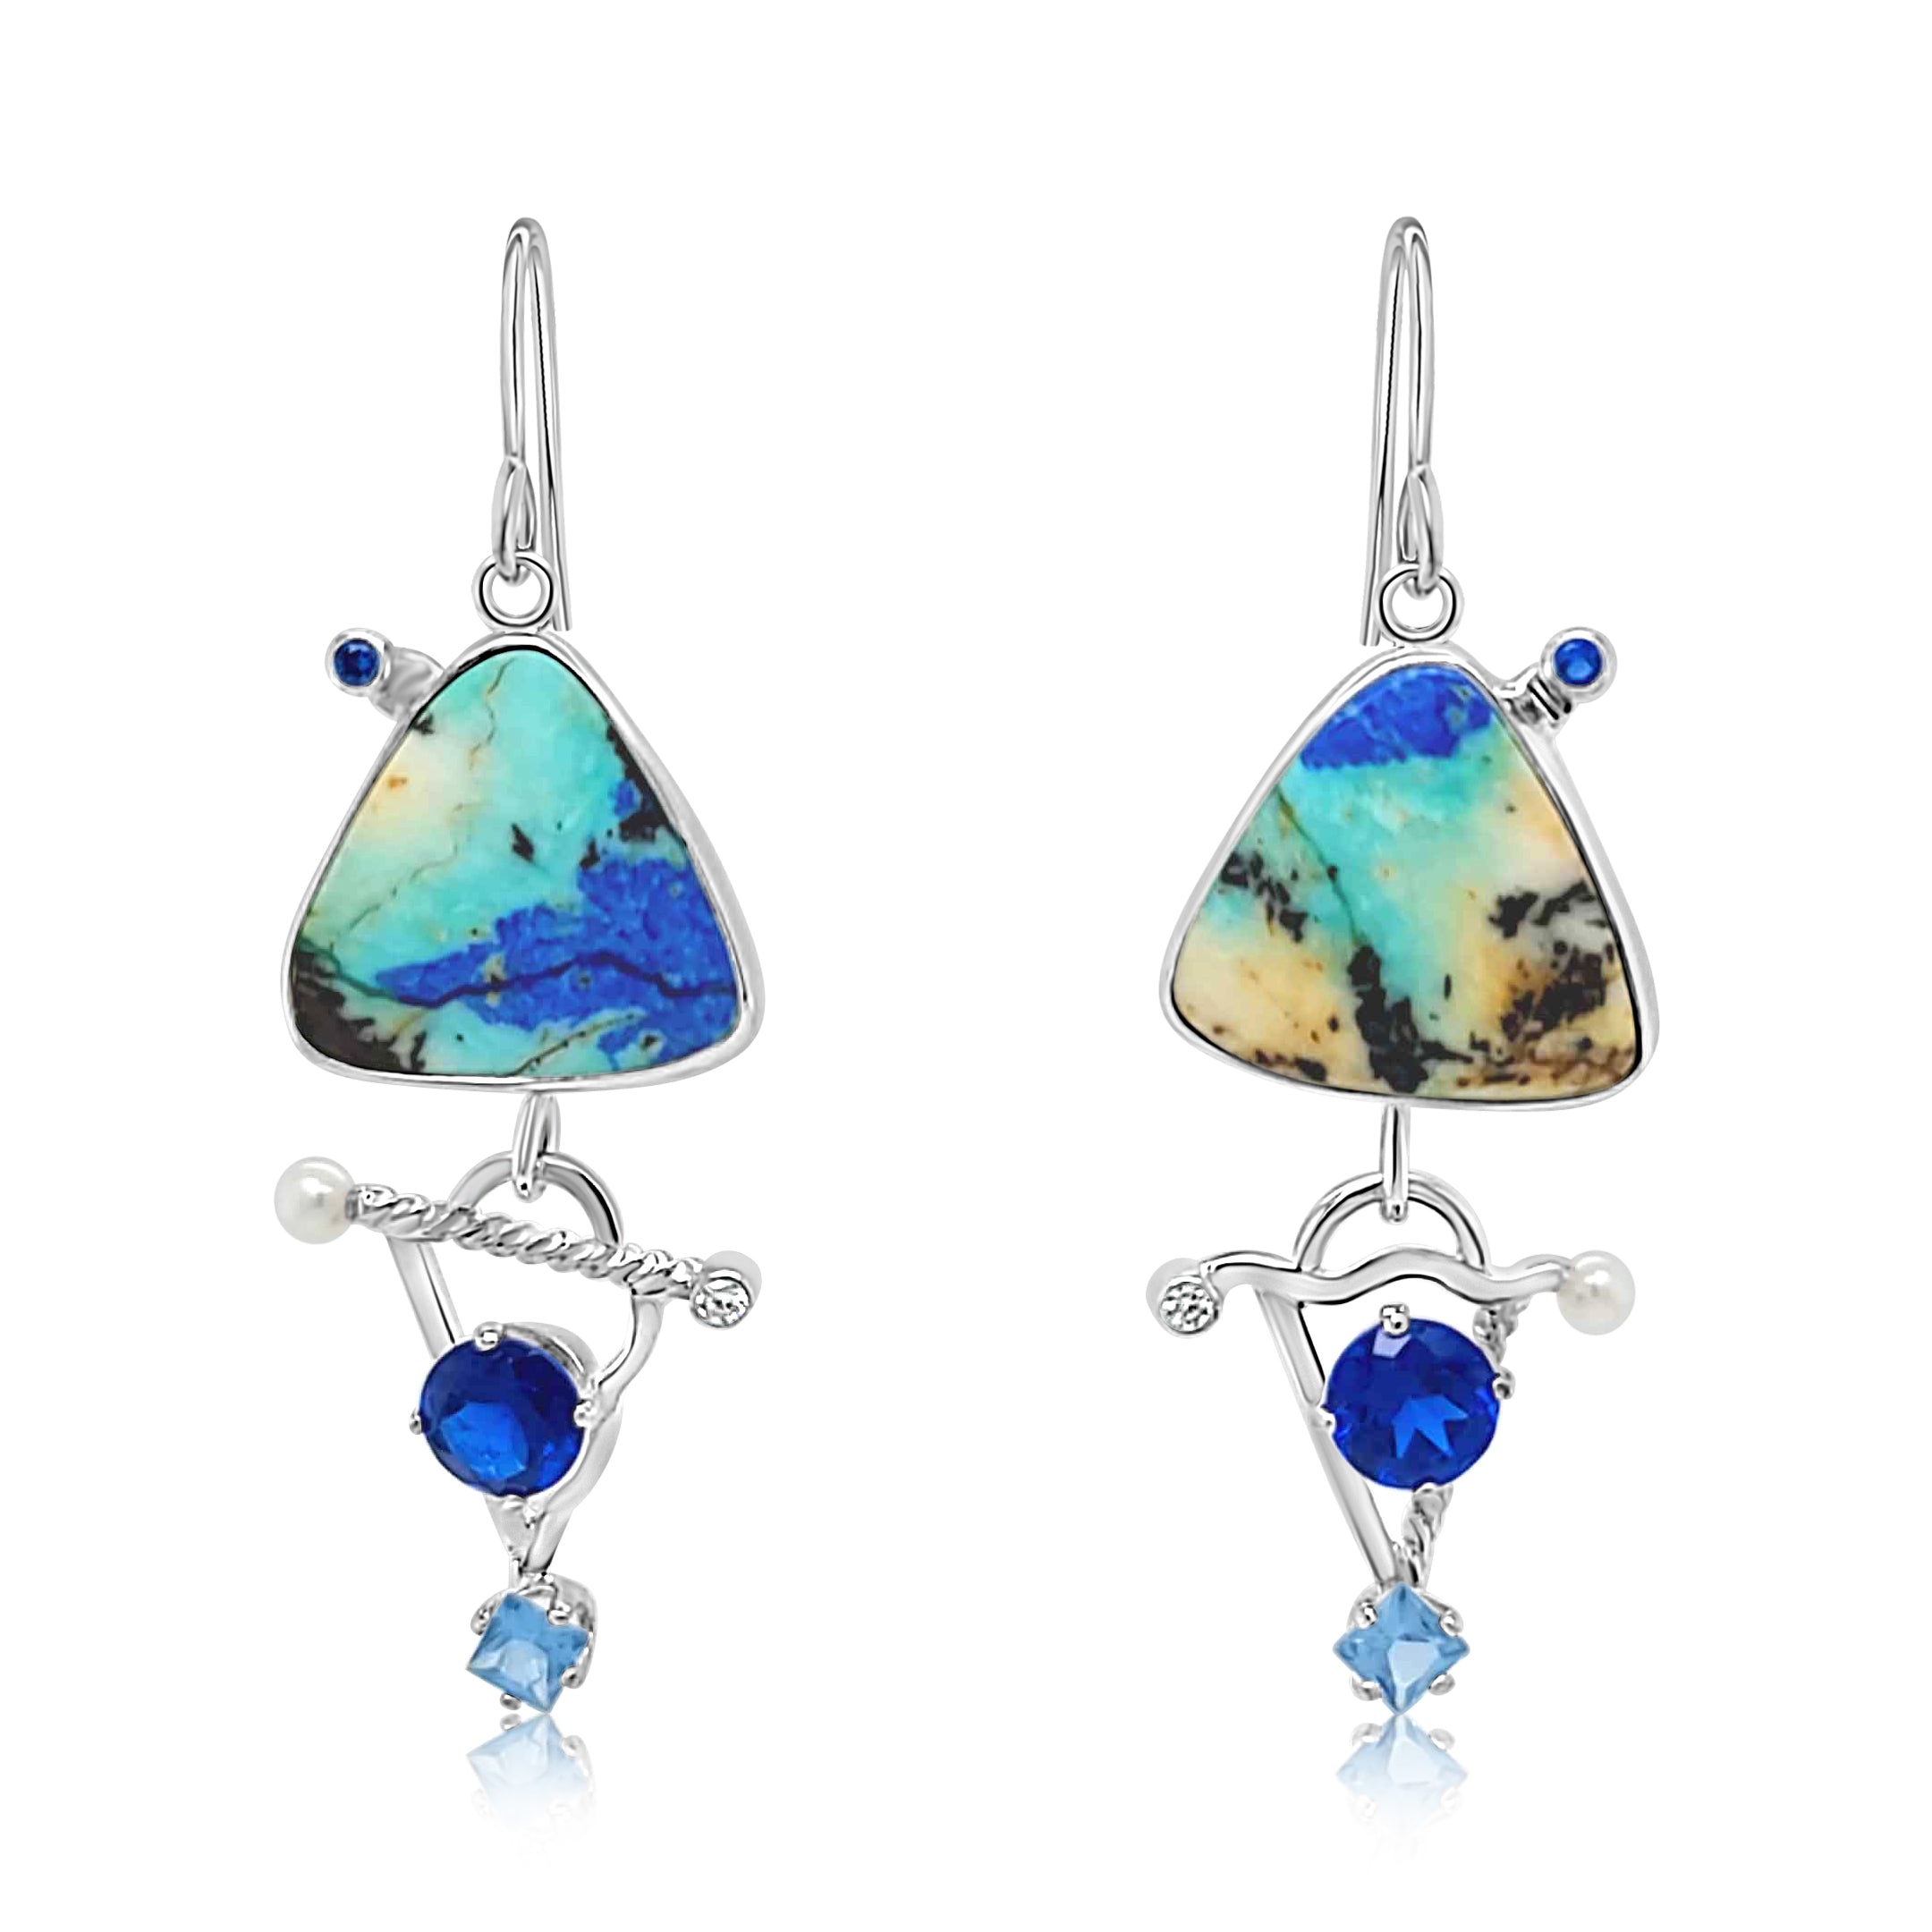 Sterling Silver, Peruvian Chrysocolla, Lab Spinel, Cubic Zirconia and Freshwater Pearl earrings